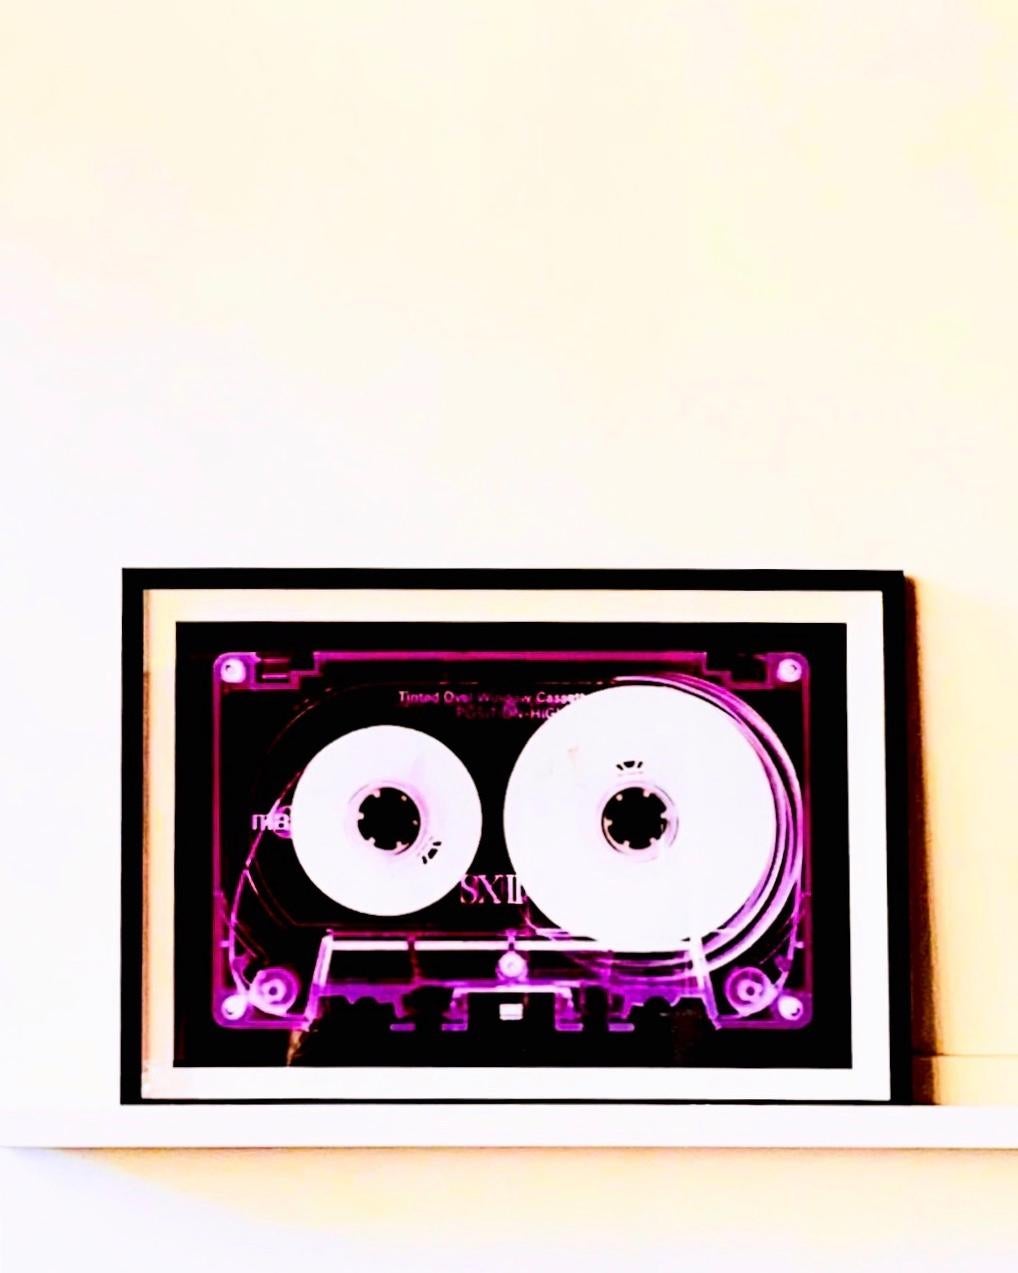 Tape Collection - Pink Tinted Cassette - Conceptual Color Music Art - Photograph by Heidler & Heeps